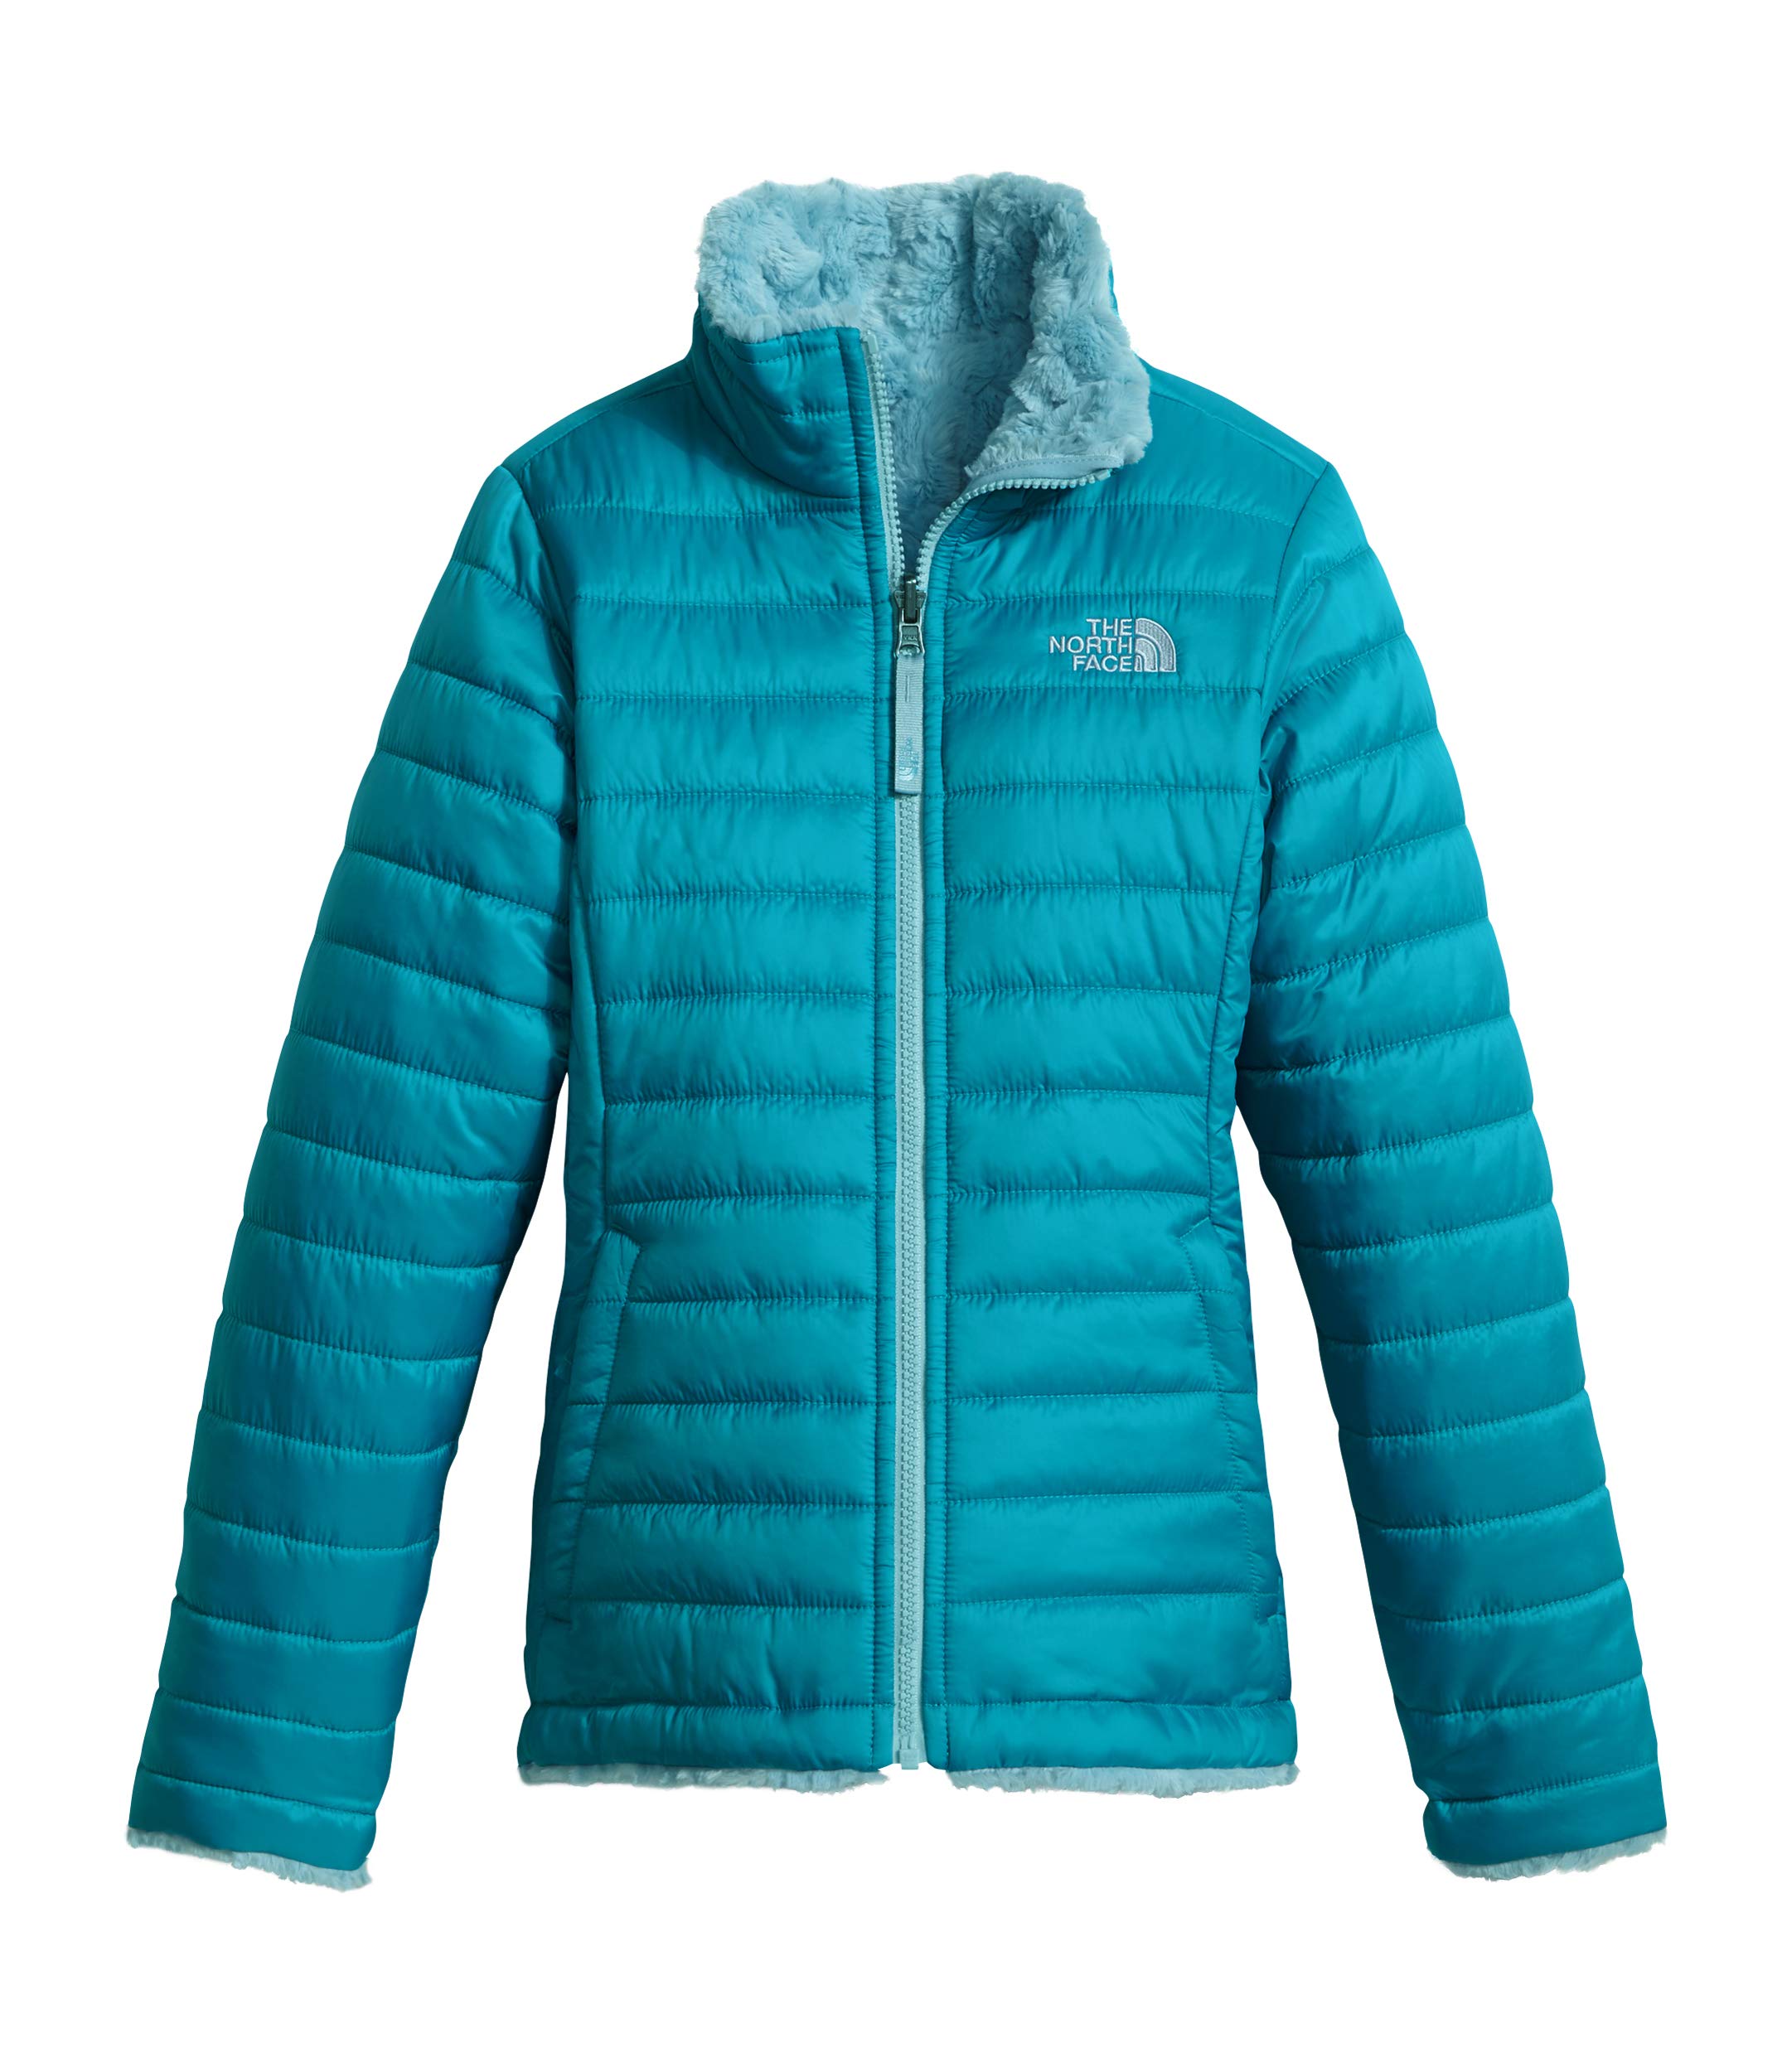 THE NORTH FACE Swirl Jacket for Girls, Girls, T0CN0179M.